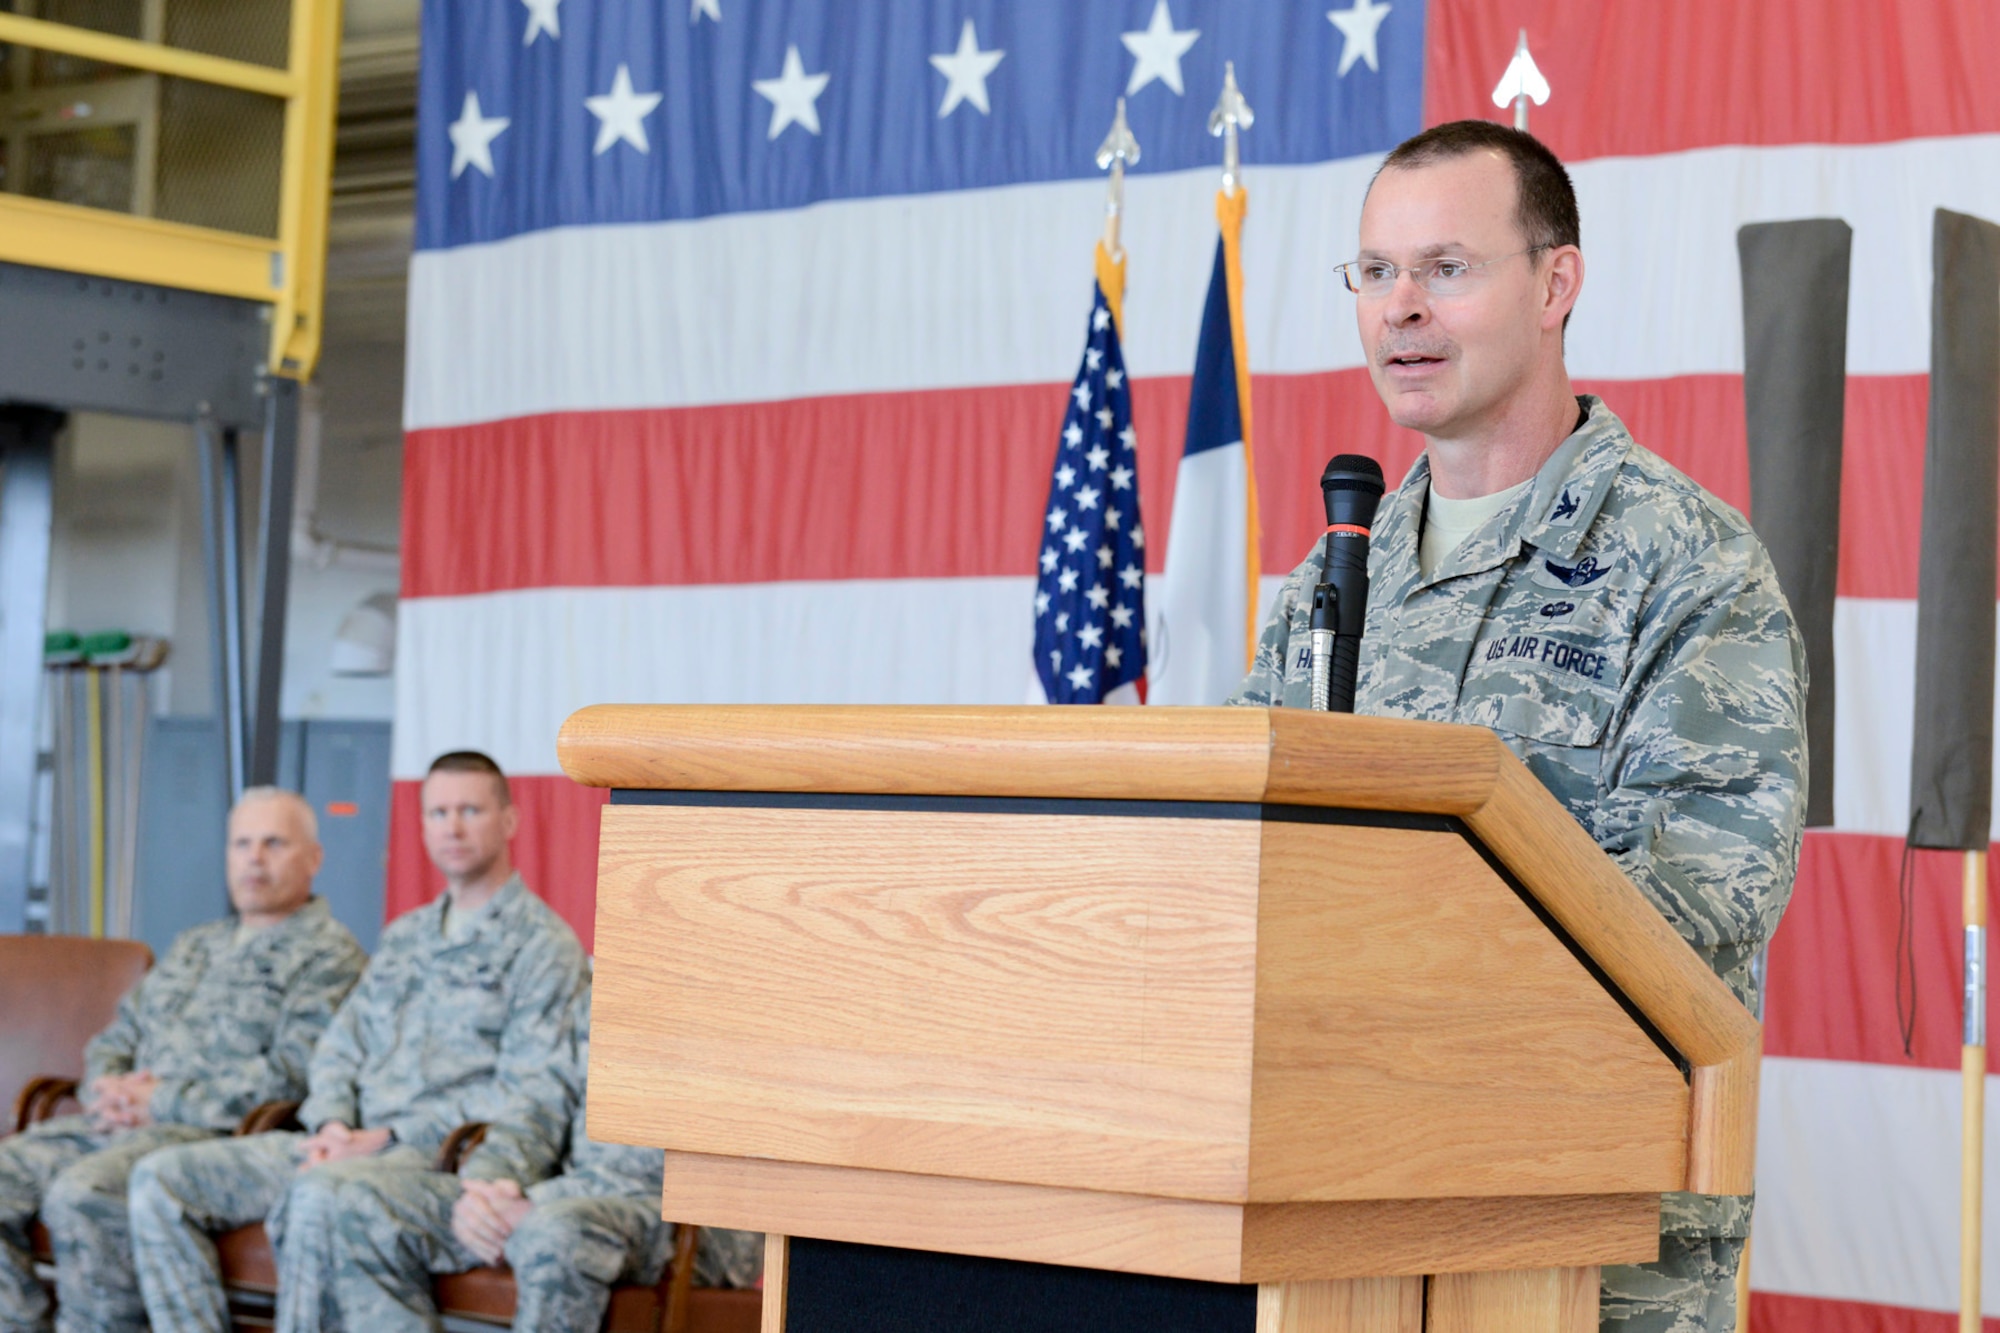 Col. Kevin Heer (standing at podium), Commander, 132d Wing (132WG), Des Moines, Iowa, speaks to members of the 132WG Intelligence Surveillance Reconnaissance Group (ISRG) during the 132WG ISRG Activation Ceremony held in the 132WG Fire House on Saturday, March 7, 2015.  This ceremony formally recognizes the official activation of the 132WG ISRG.  (U.S. Air National Guard photo by Staff Sgt. Linda K. Burger/Released)